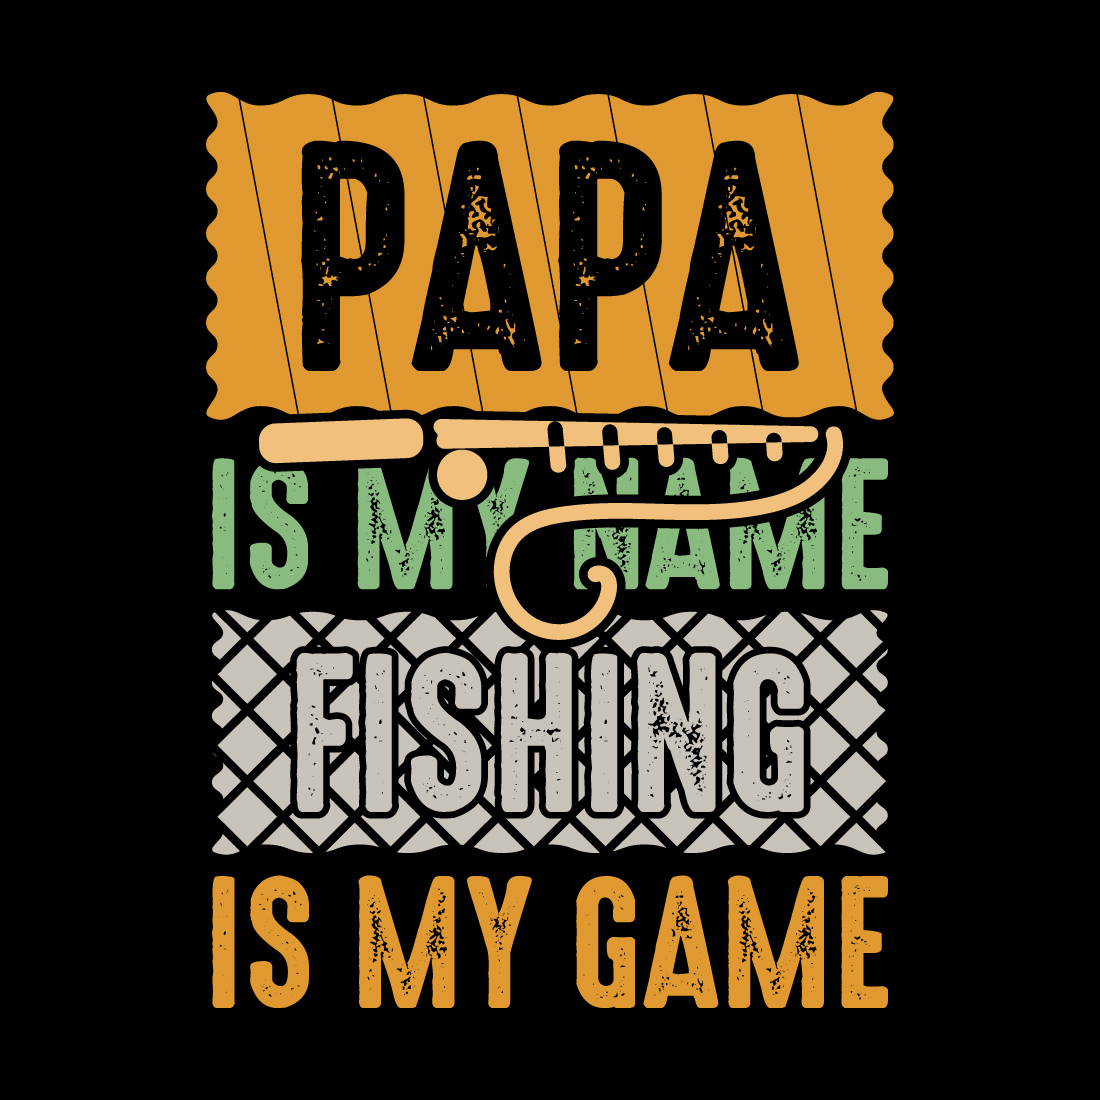 fathers day t shirt dad t shirt design father day tshirt happy fathers day t shirt design ideas dad day papa son fathers day shirt ideas for family 7 7